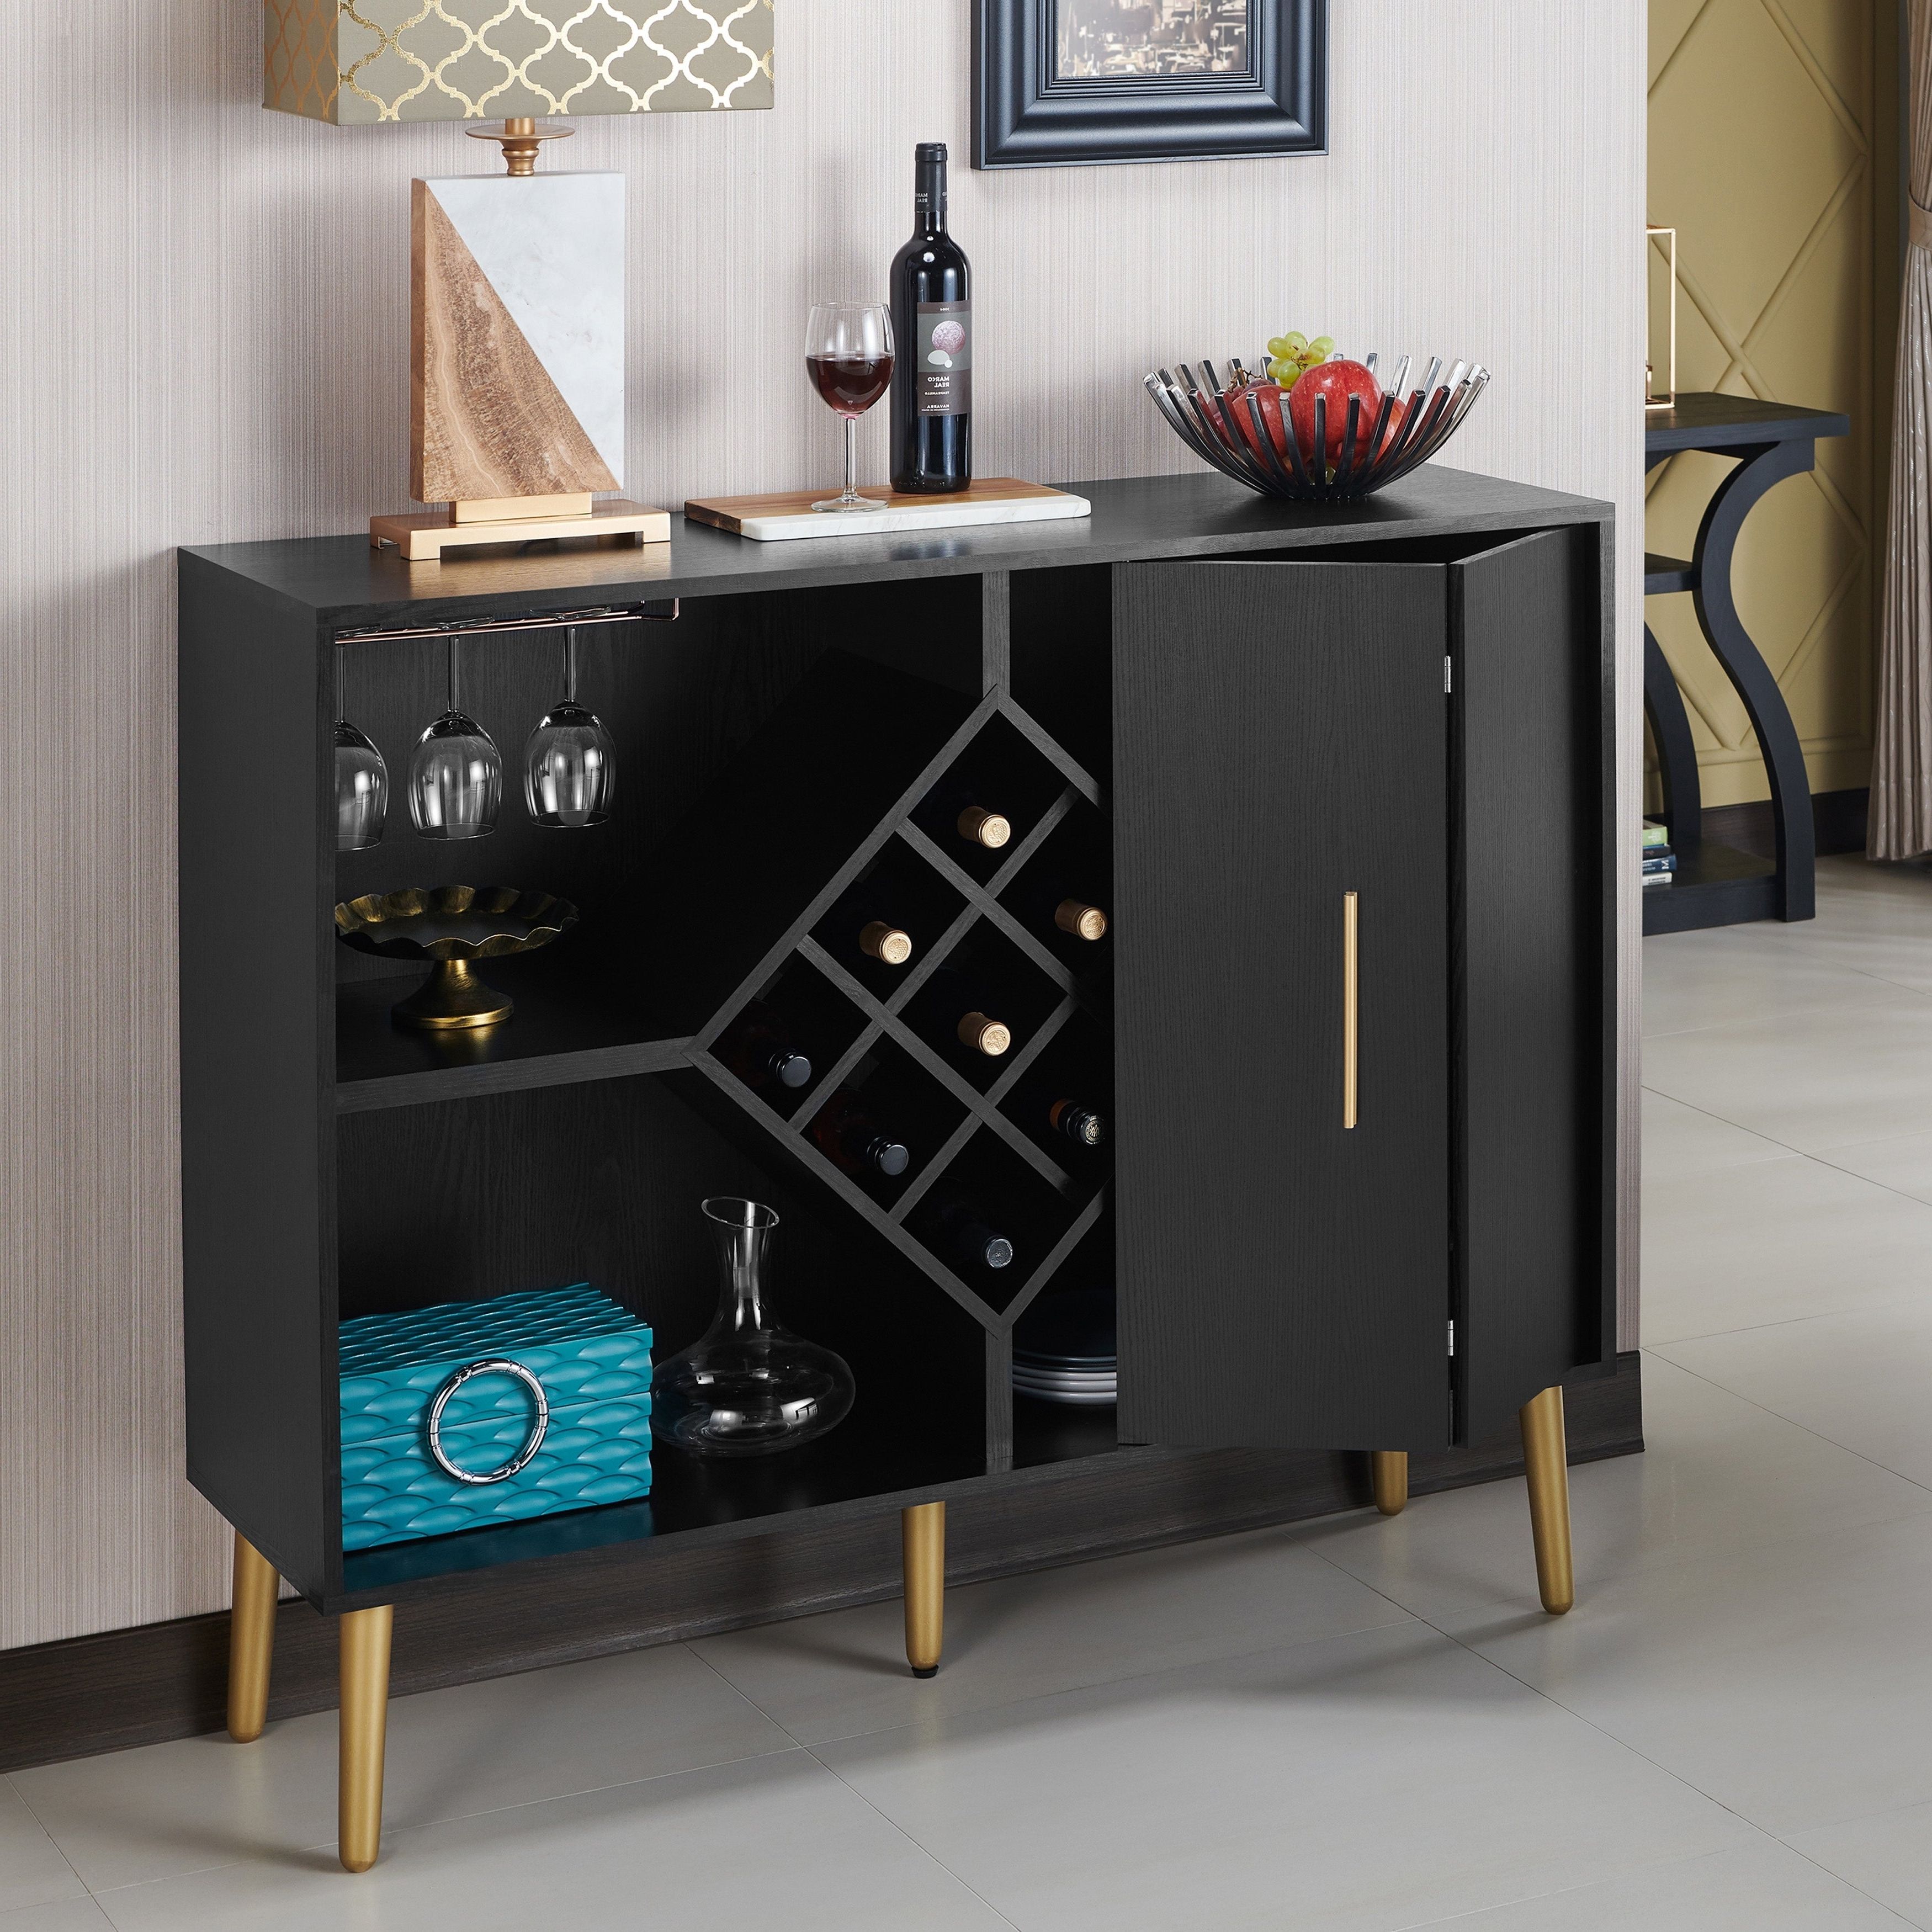 Carson Carrington Lesund Modern Black Storage Buffet With Regard To Wooden Buffets With Two Side Door Storage Cabinets And Stemware Rack (Gallery 7 of 20)